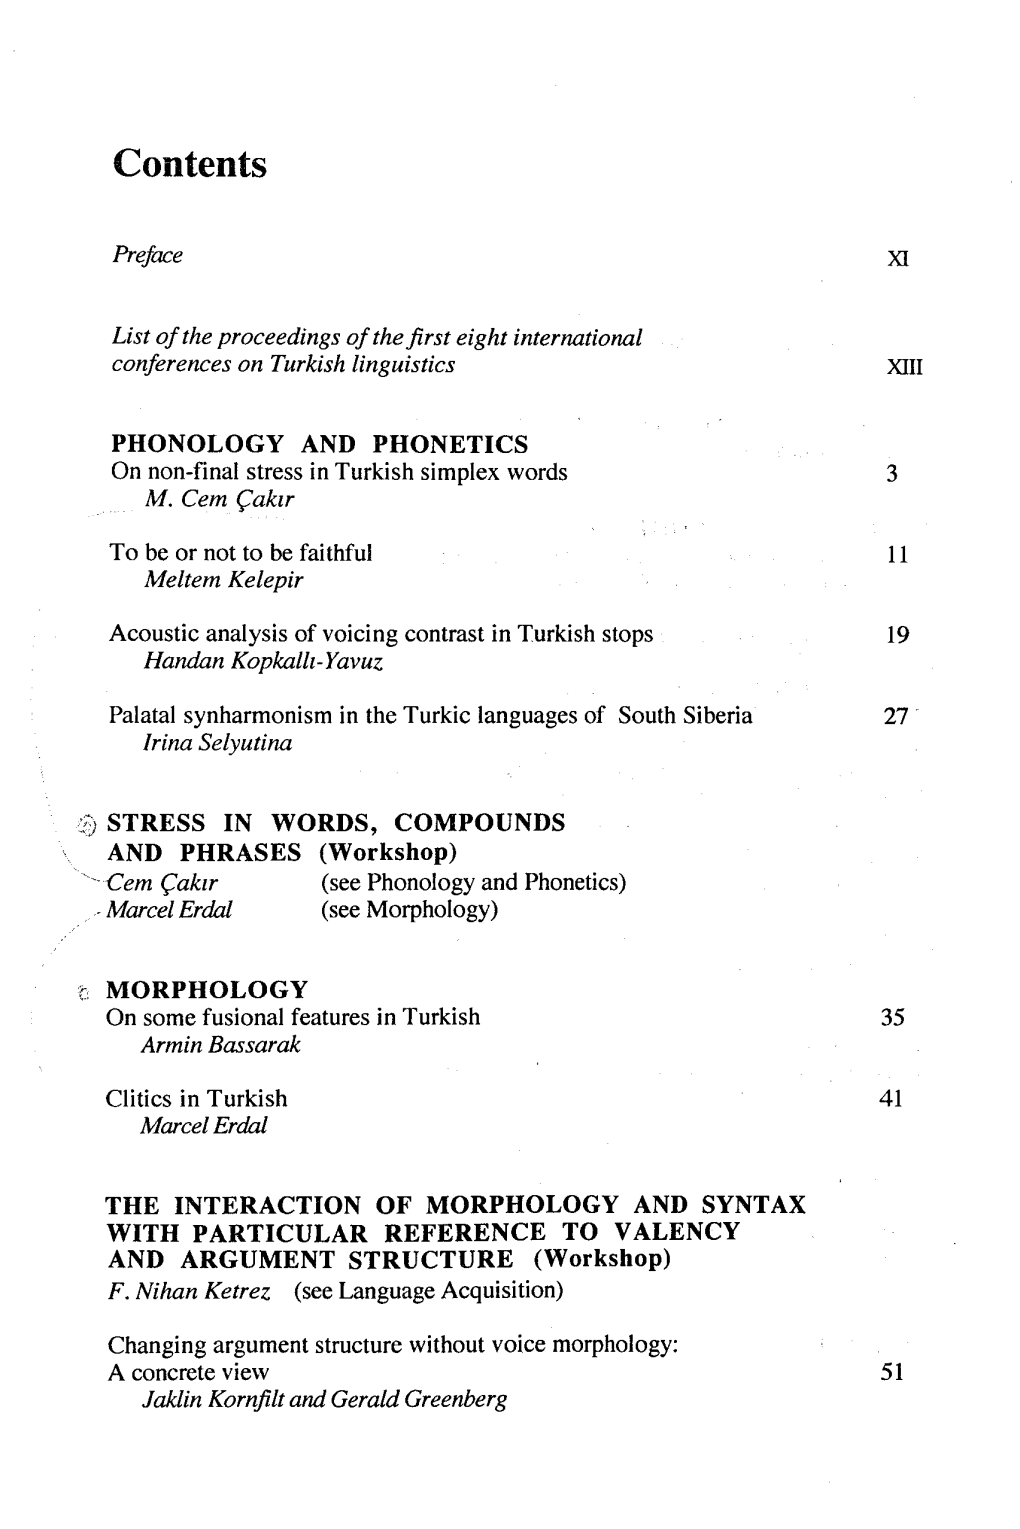 Contents Preface List of the Proceedings of the First Eight